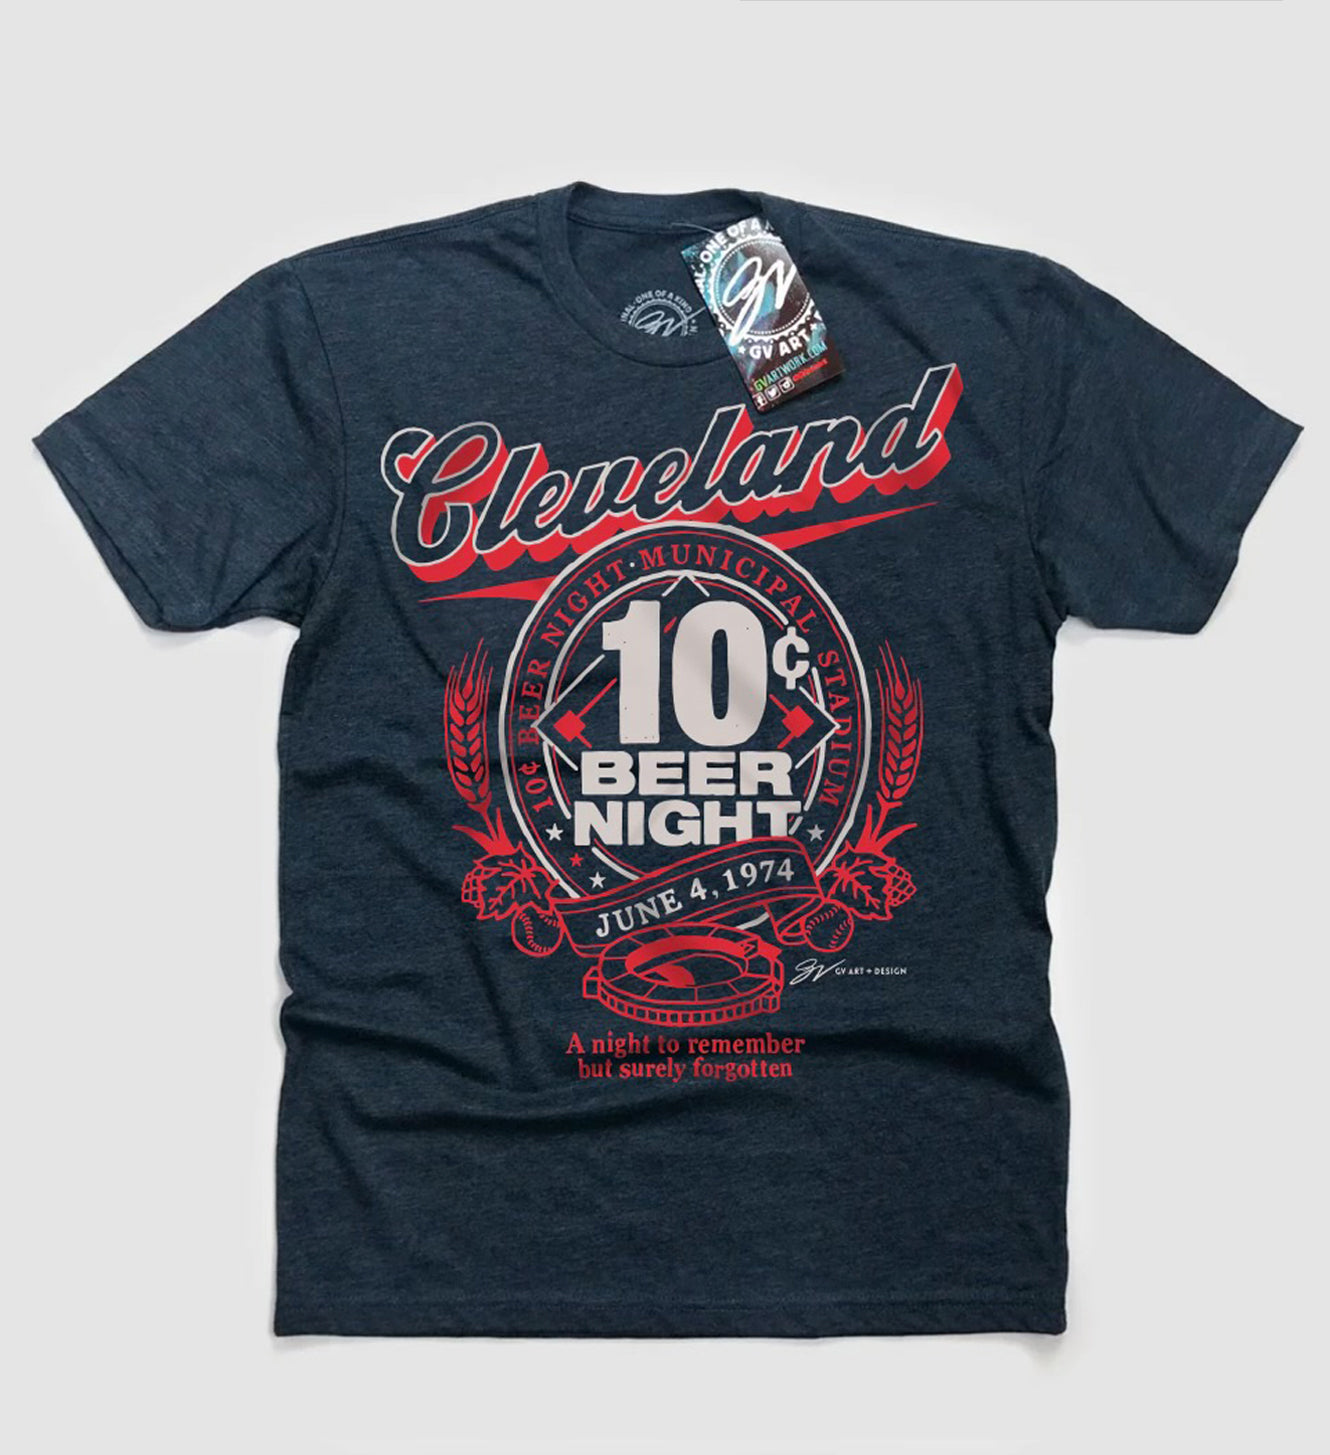 Cleveland 10 cent Beer Night Tshirt